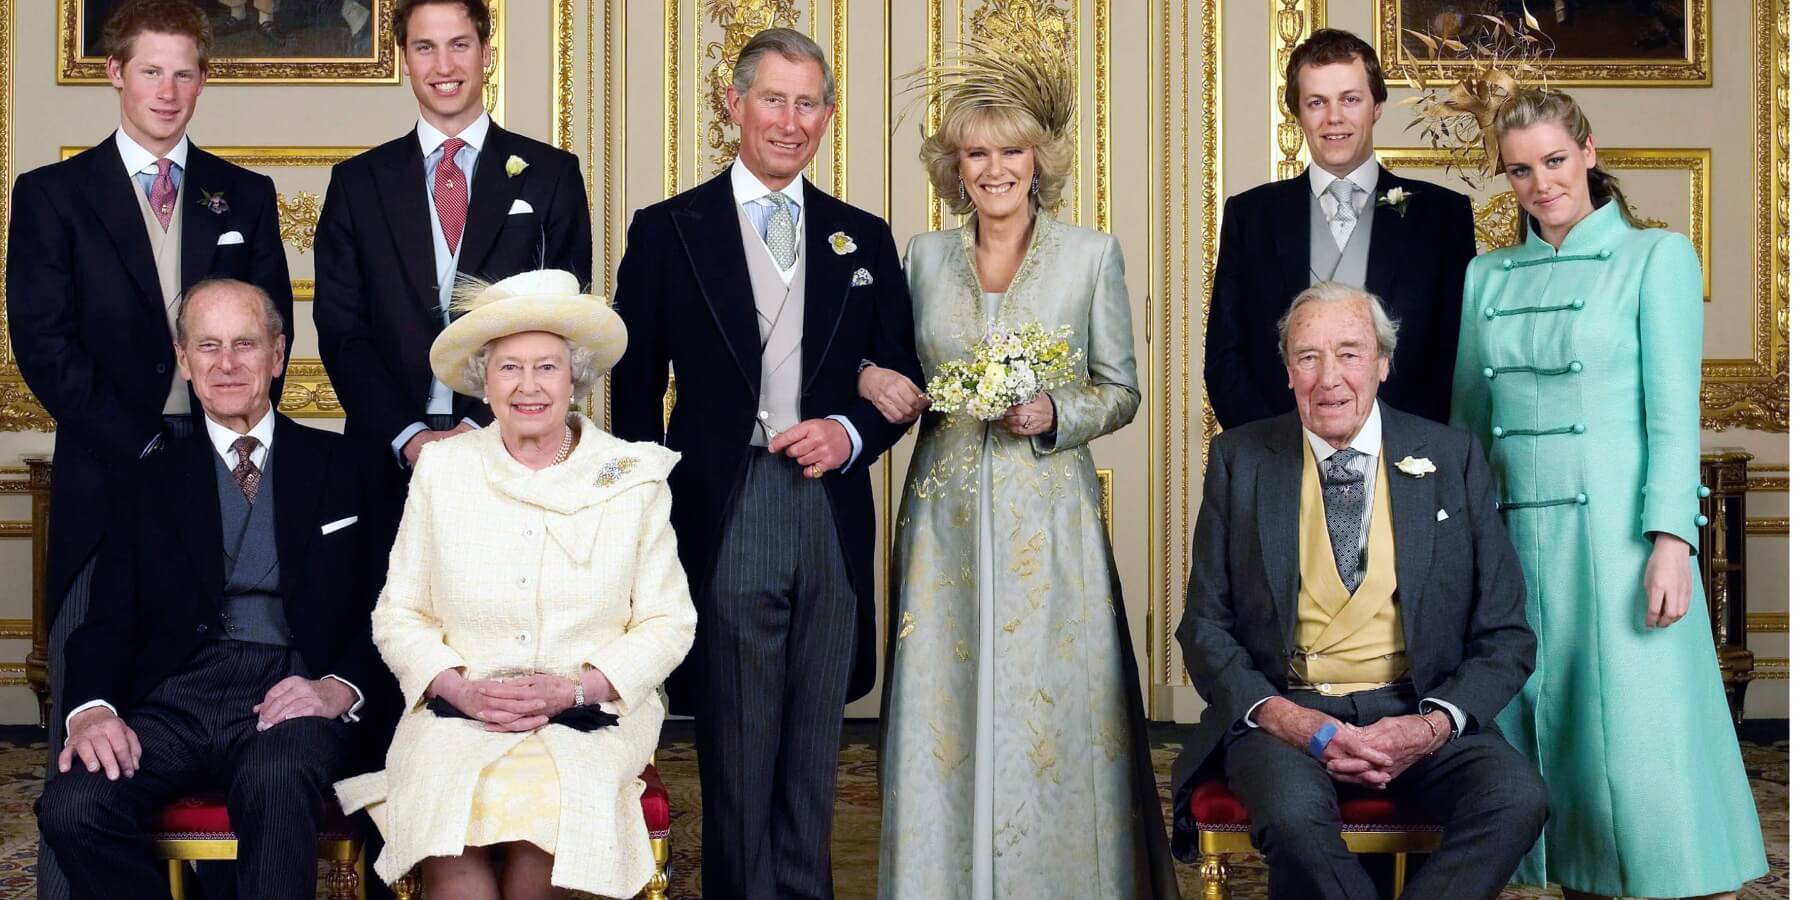 King Charles, Camilla Parker Bowles, Prince Harry, Prince William, Tom and Laura Parker Bowles, Prince Philip and Queen Elizabeth.